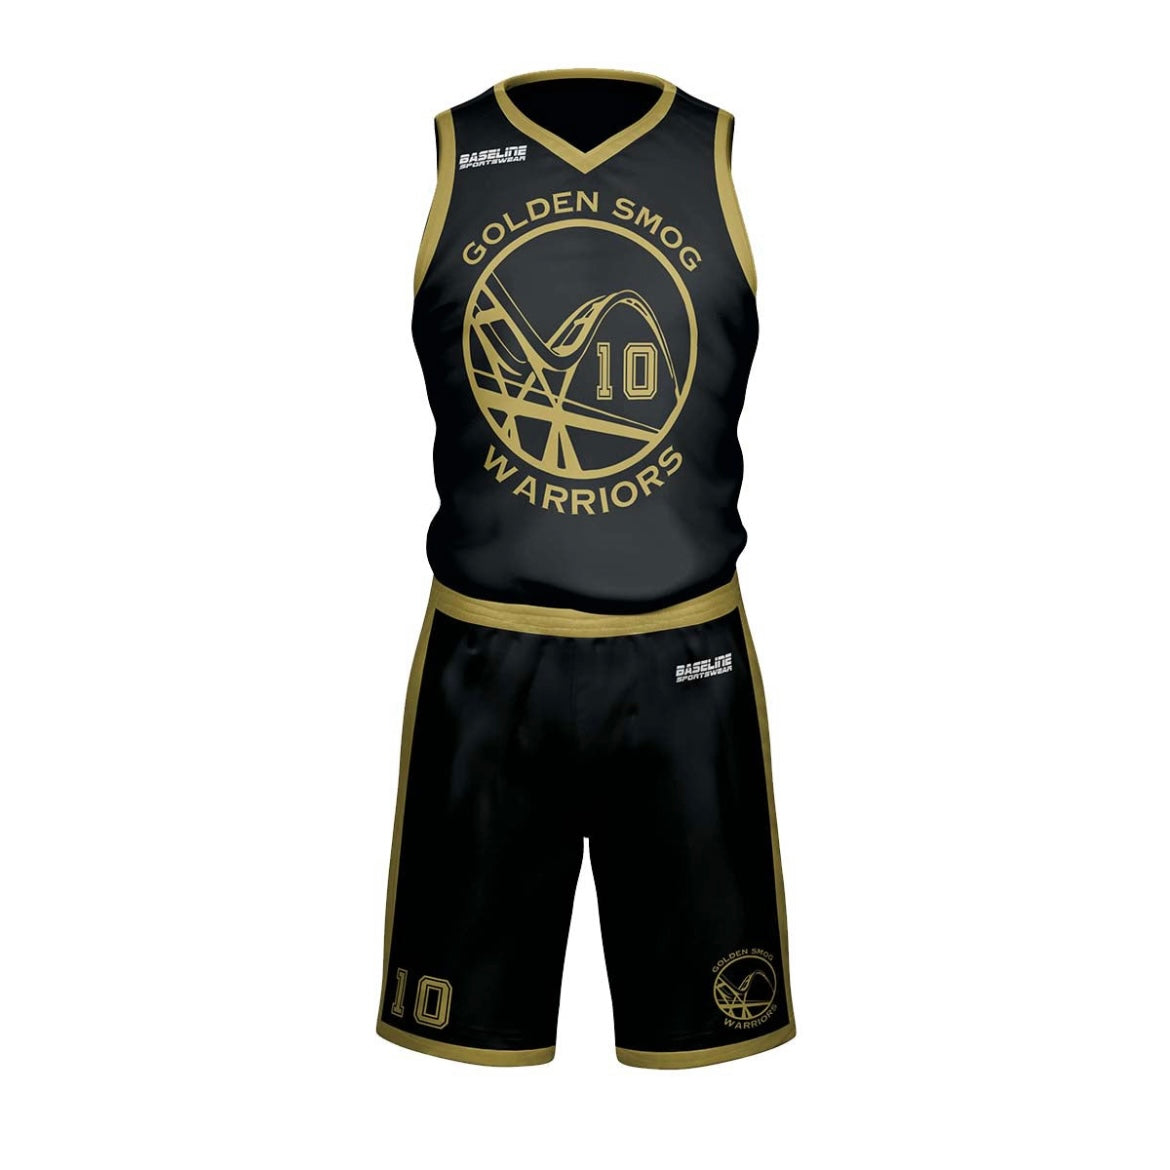 Copy of The Golden Smog Warriors Home Kit